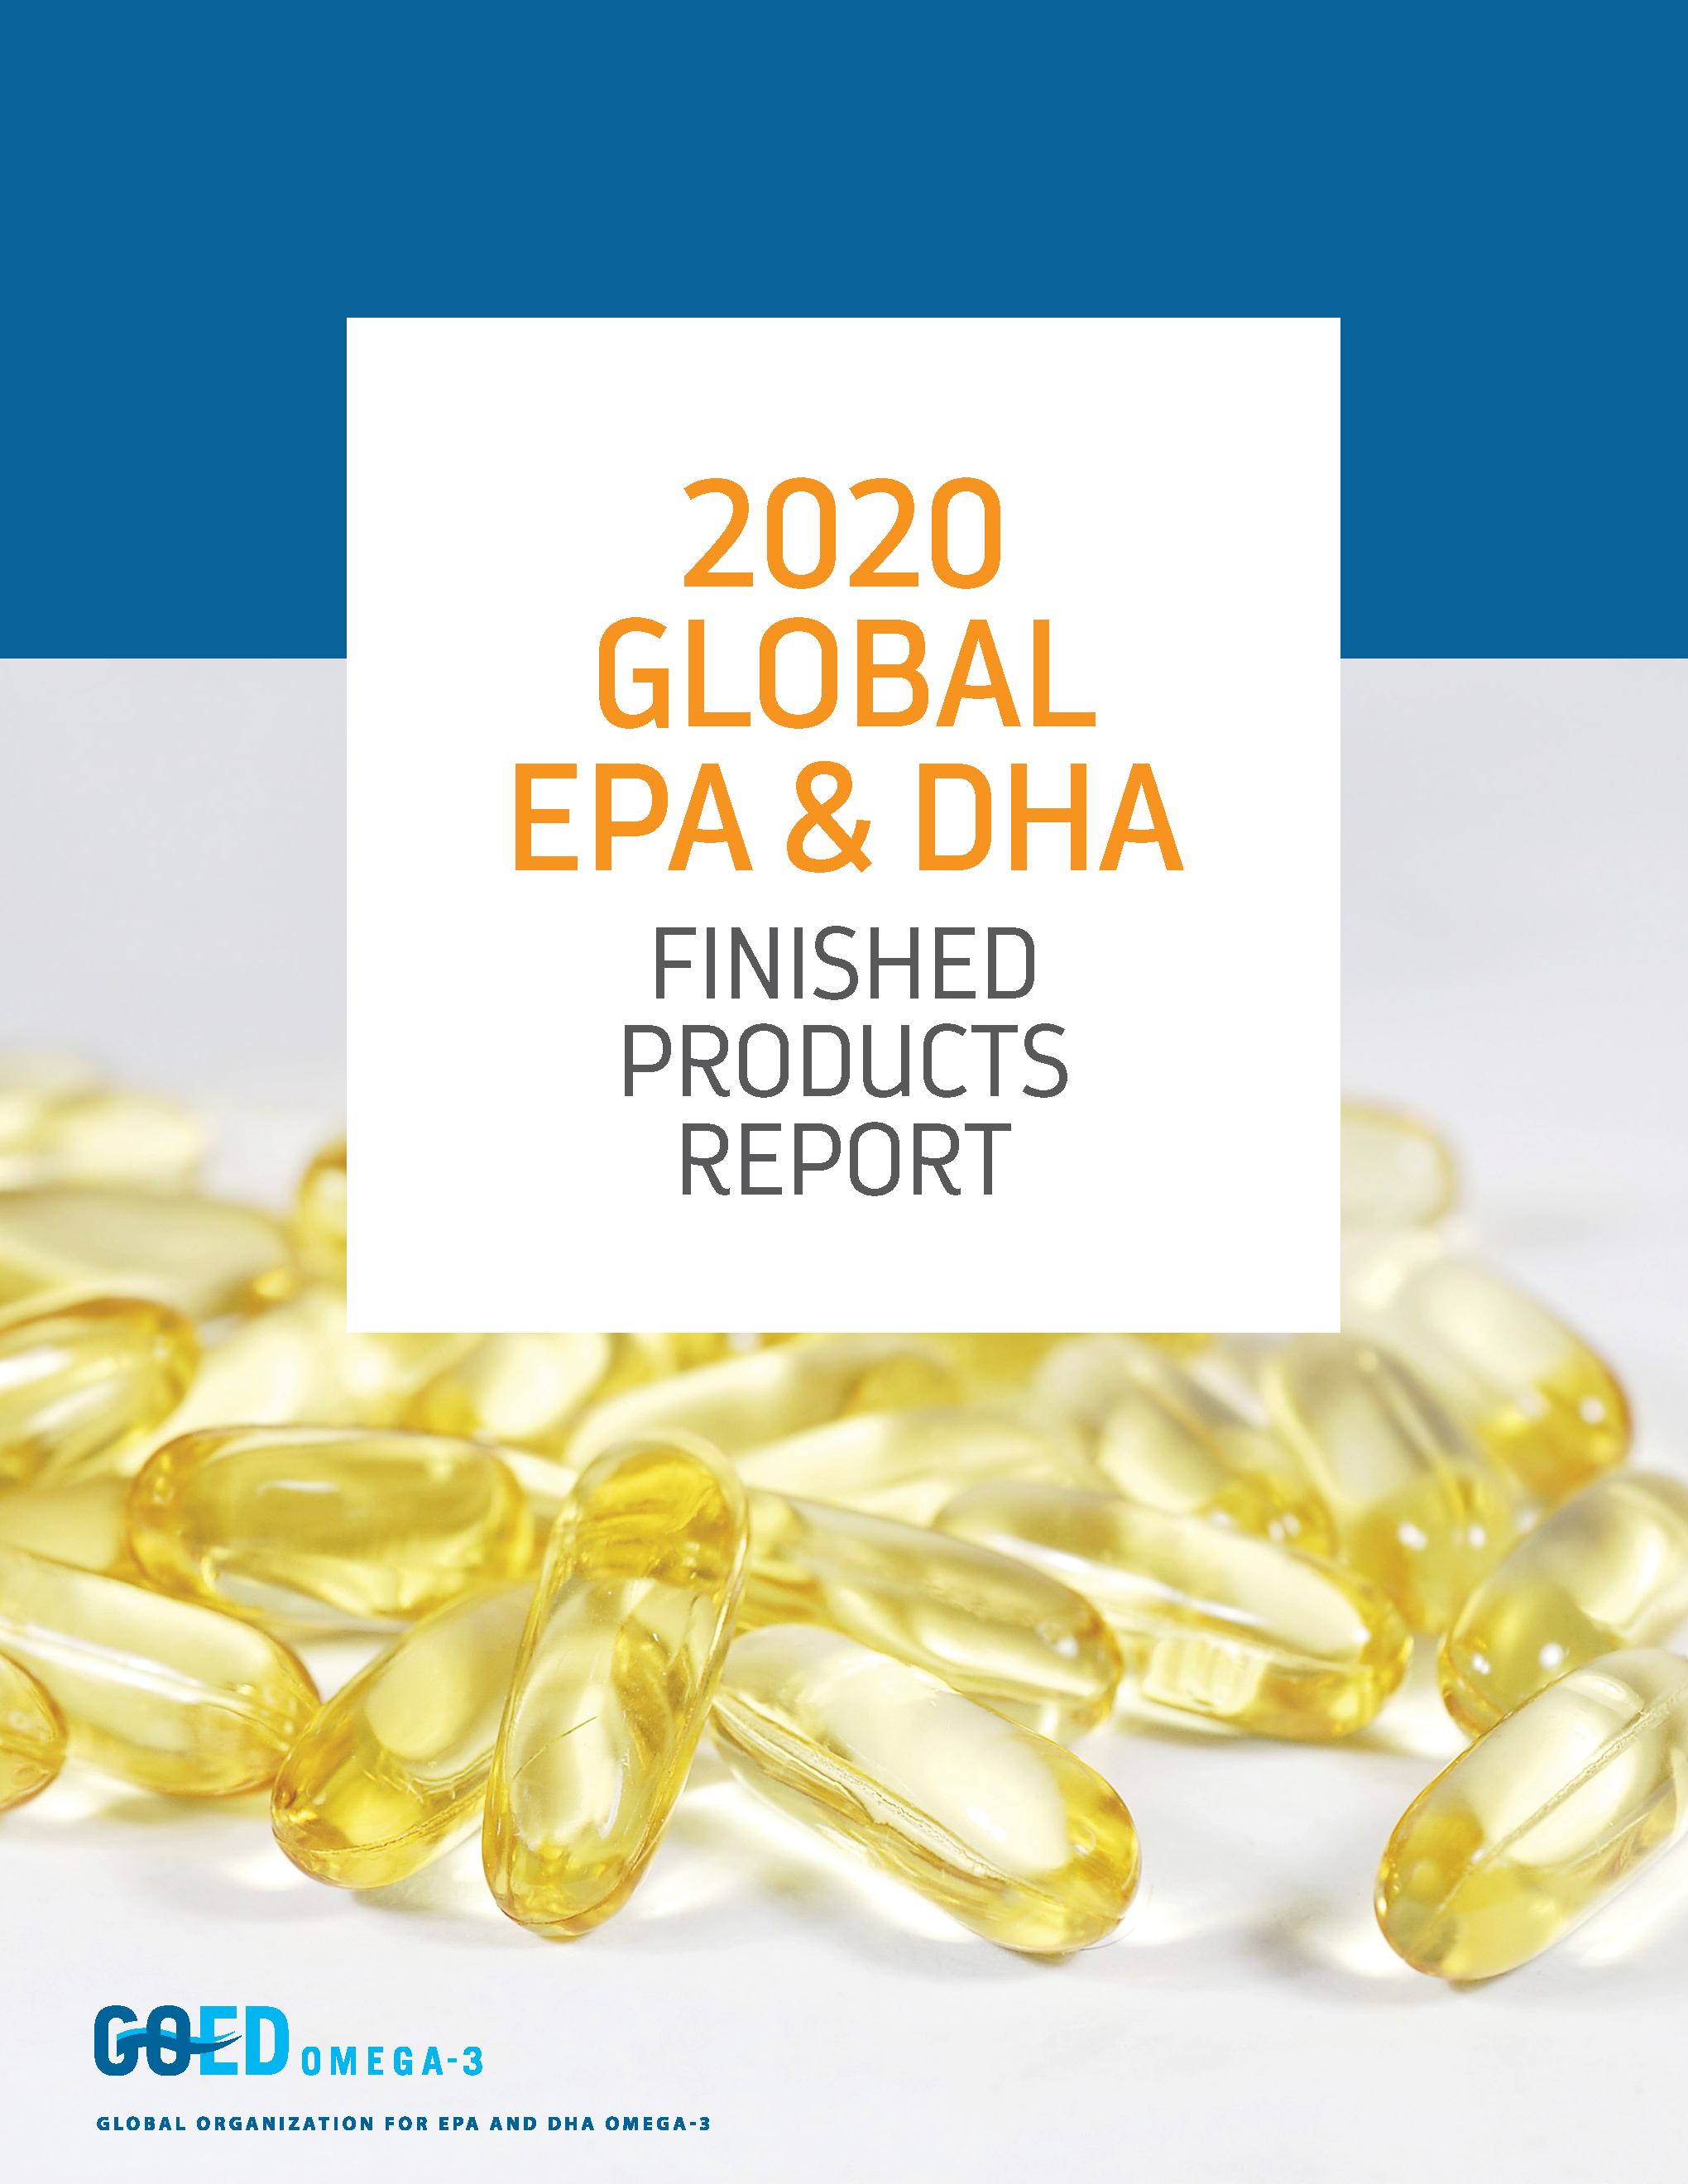 Data from Omega-3 Experts The Omega-3 Ingredient Market